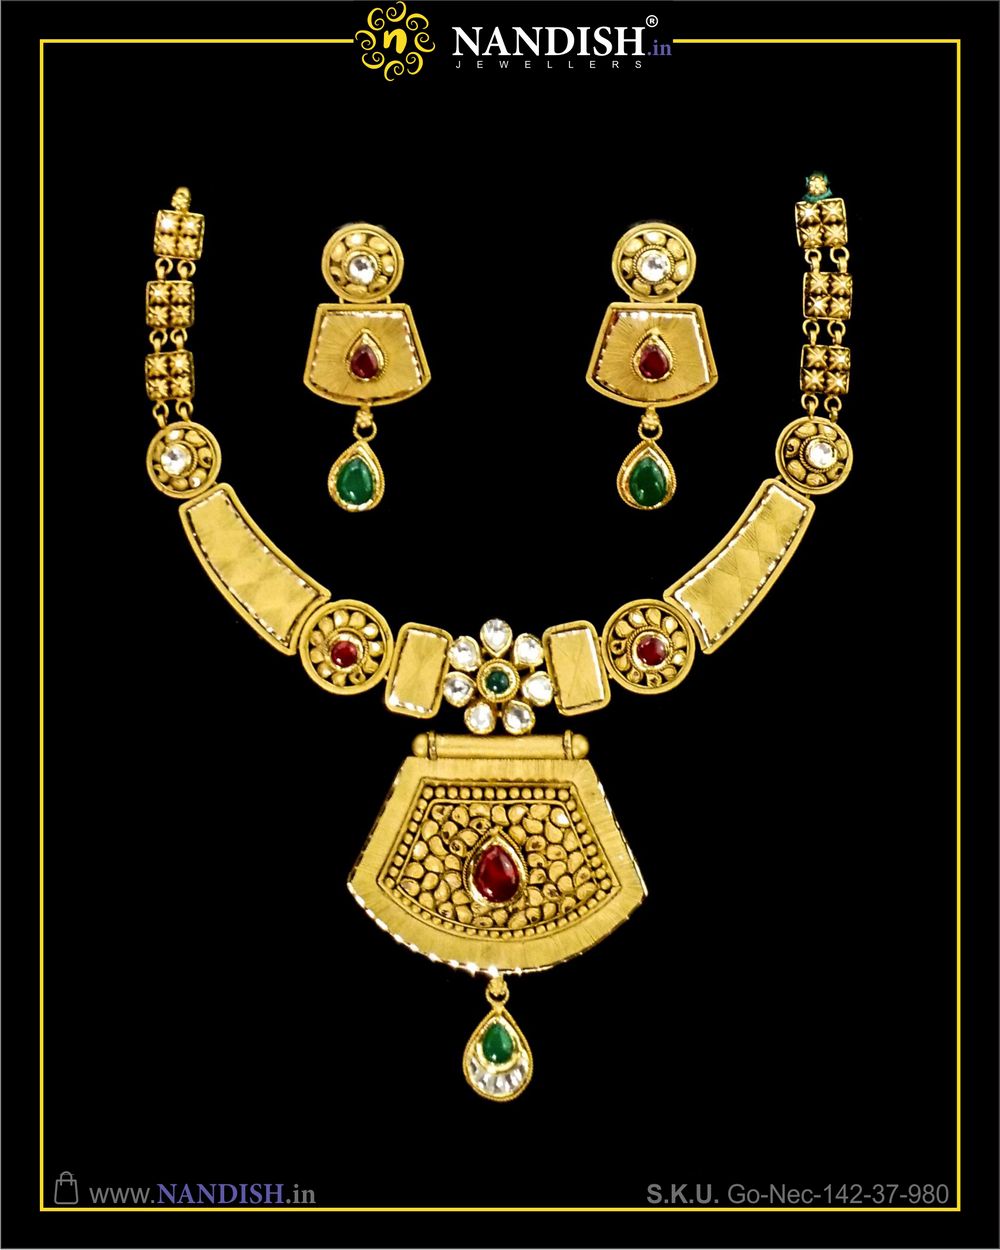 Photo From Gold Necklace - By Nandish Jewellers